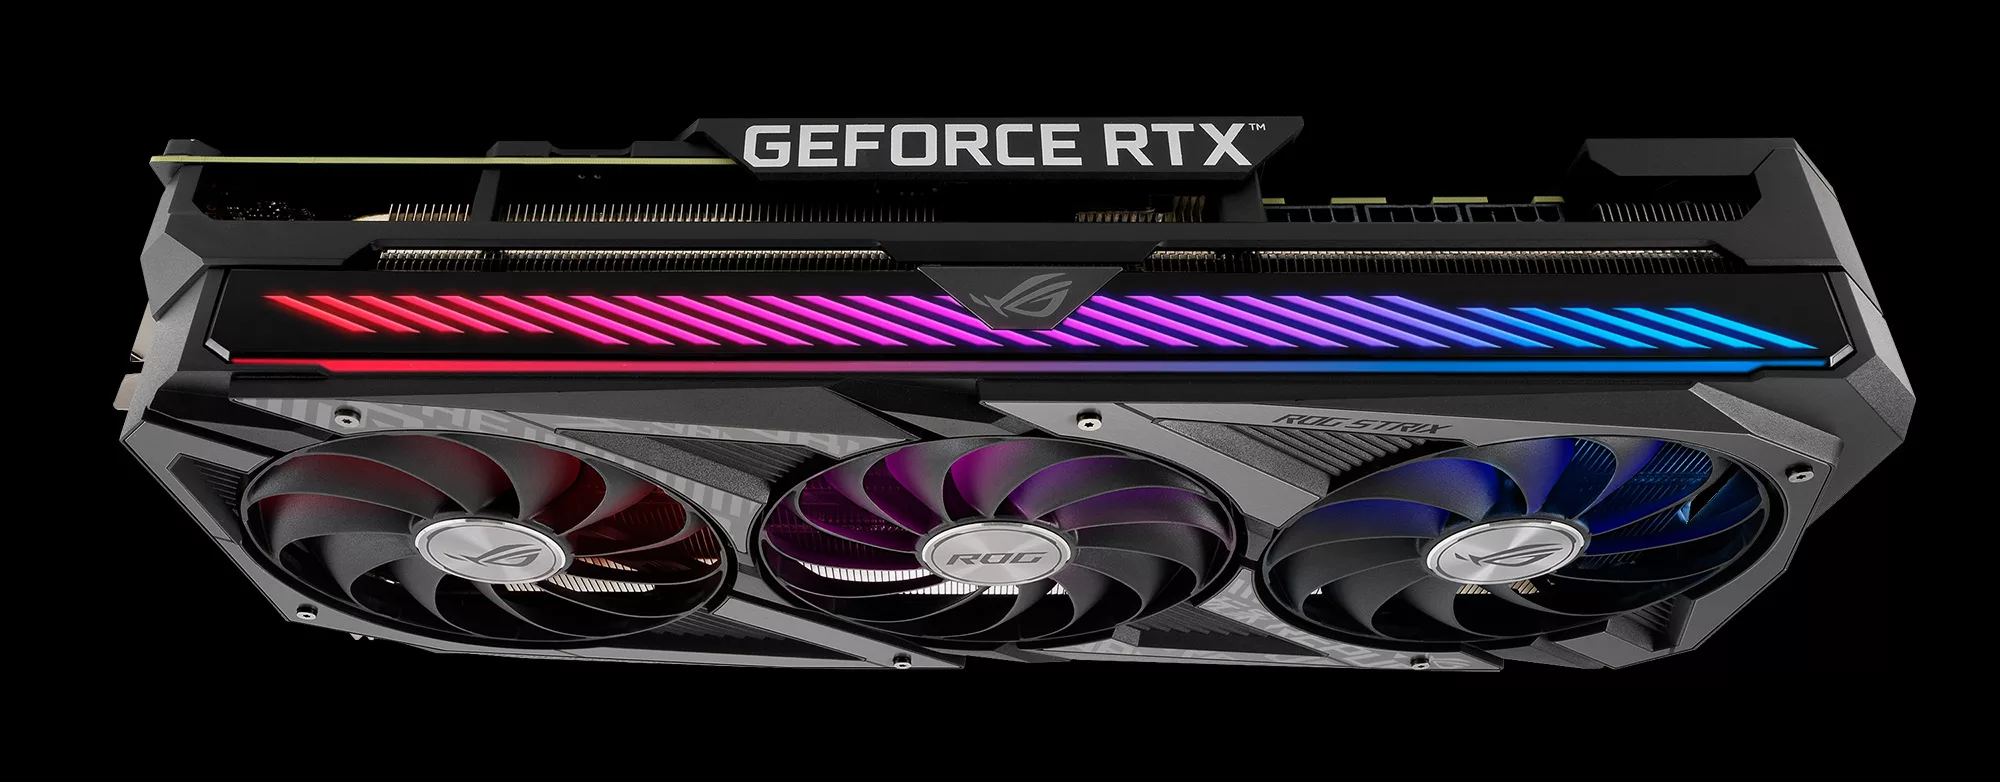 A top view of an ROG Strix RTX 3080 graphics card with colored lighting on a black background.